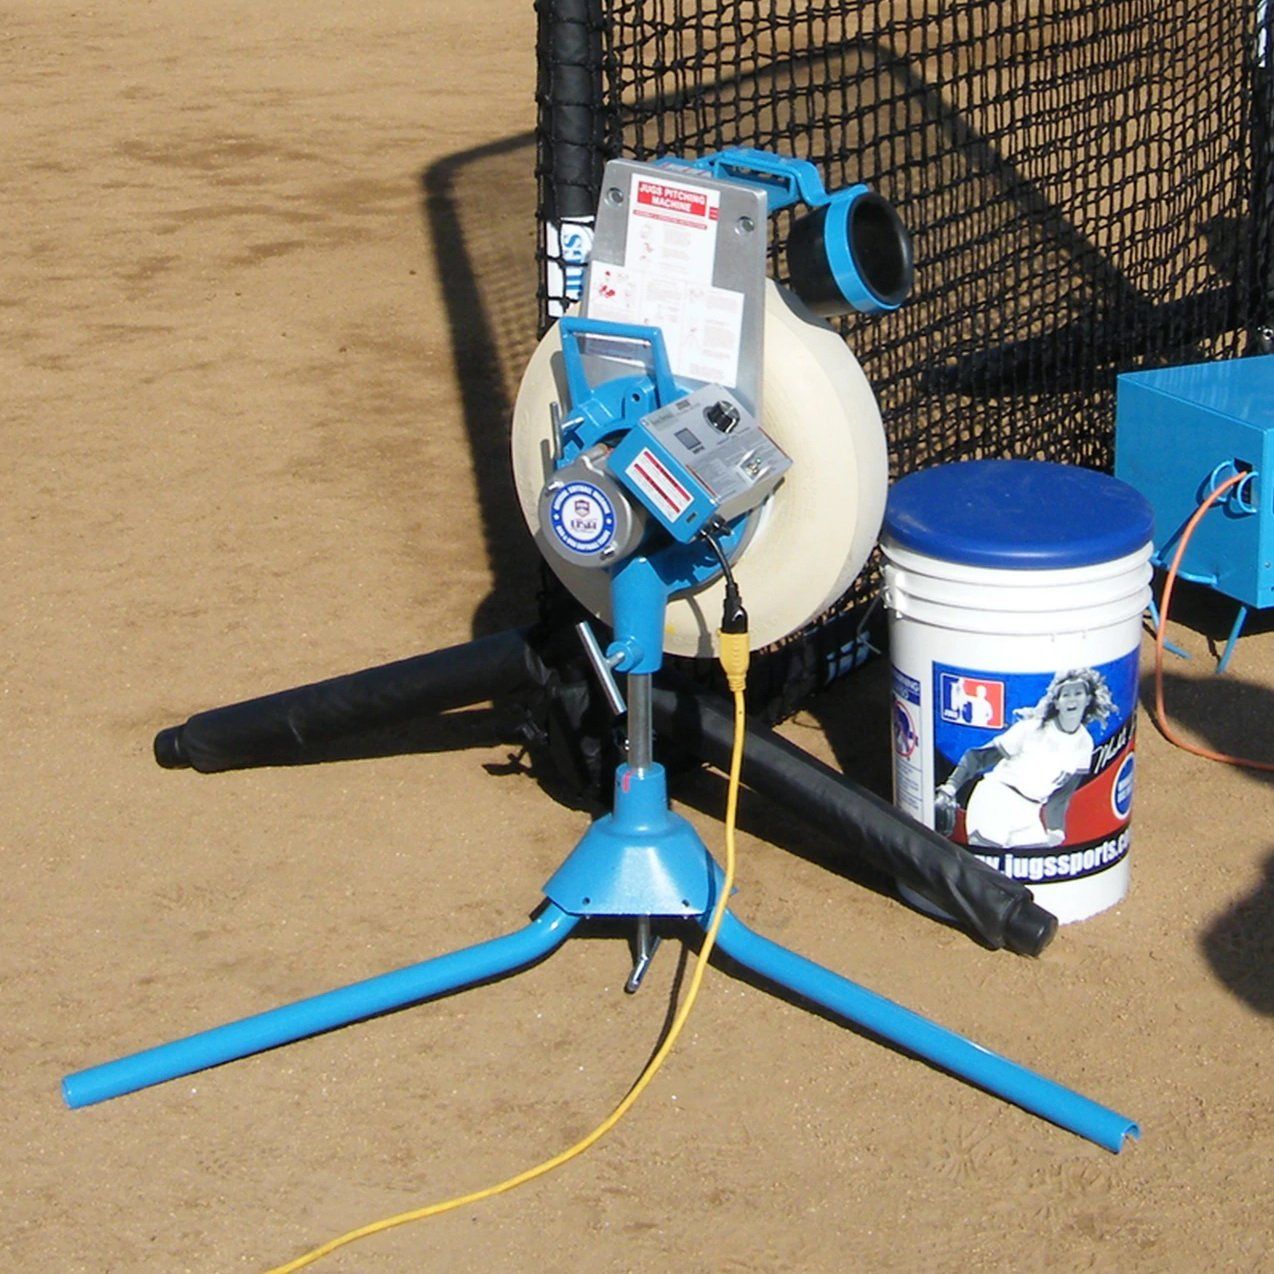 Jugs BP1 Pitching Machine for Softball on Practice Field